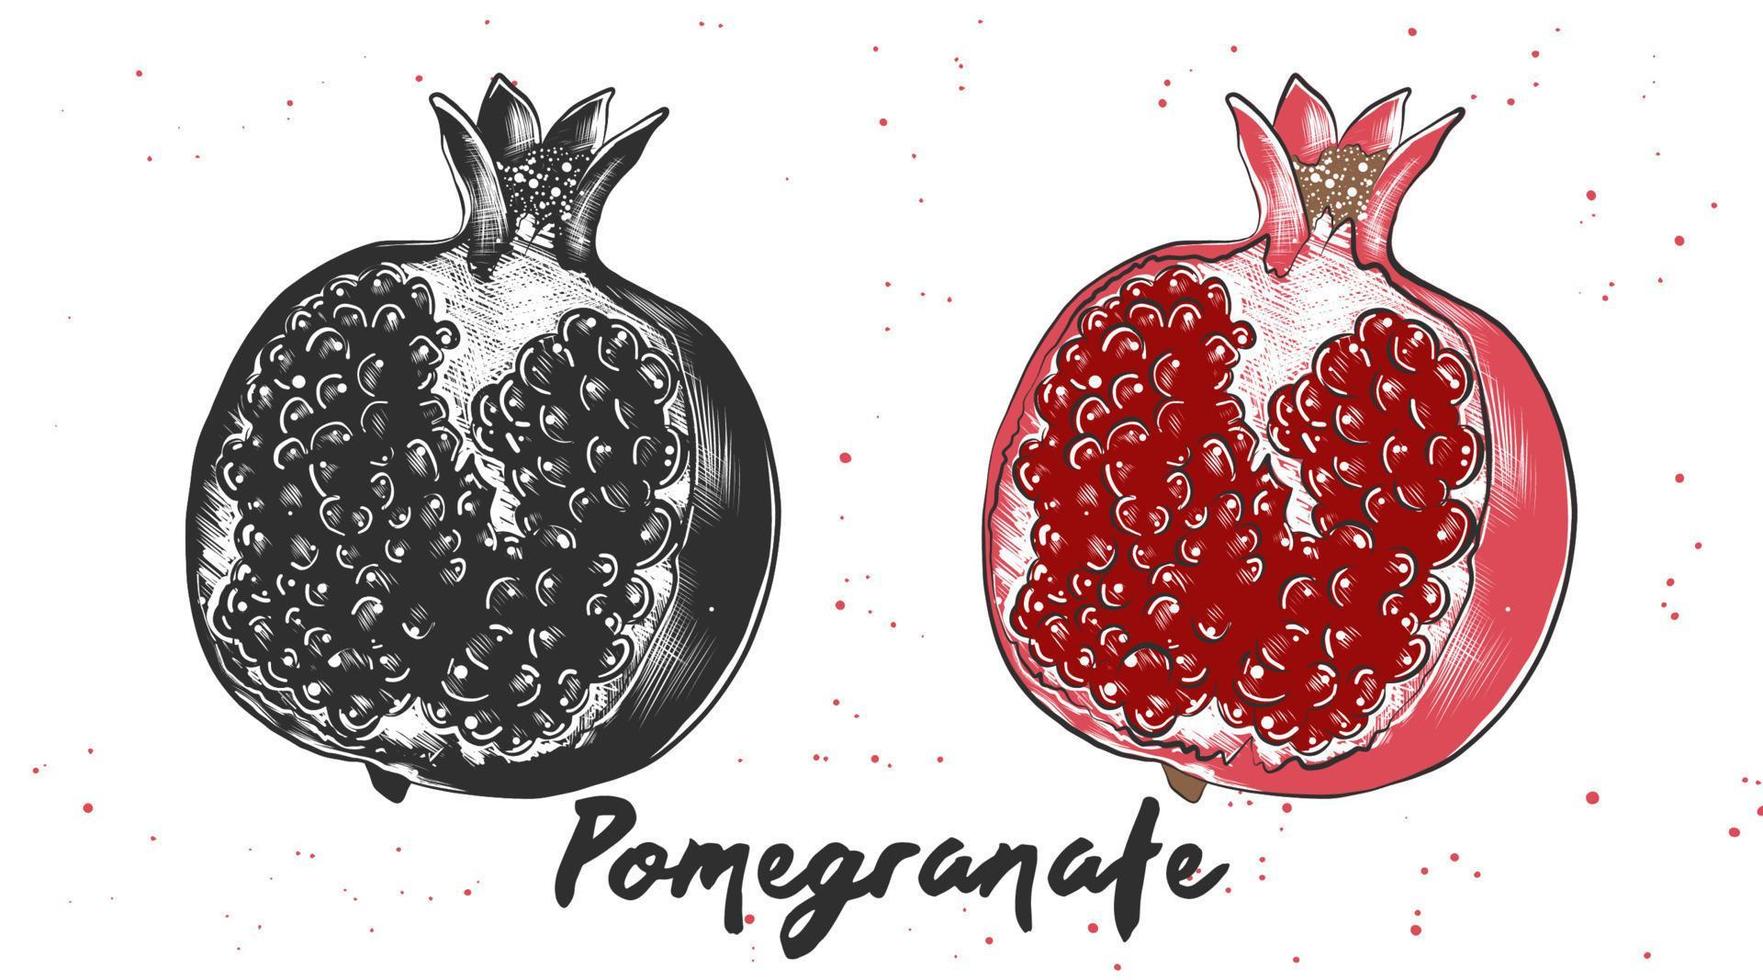 Vector engraved style illustration for posters, decoration and print. Hand drawn sketch of pomegranate in monochrome and colorful. Detailed vegetarian food drawing.